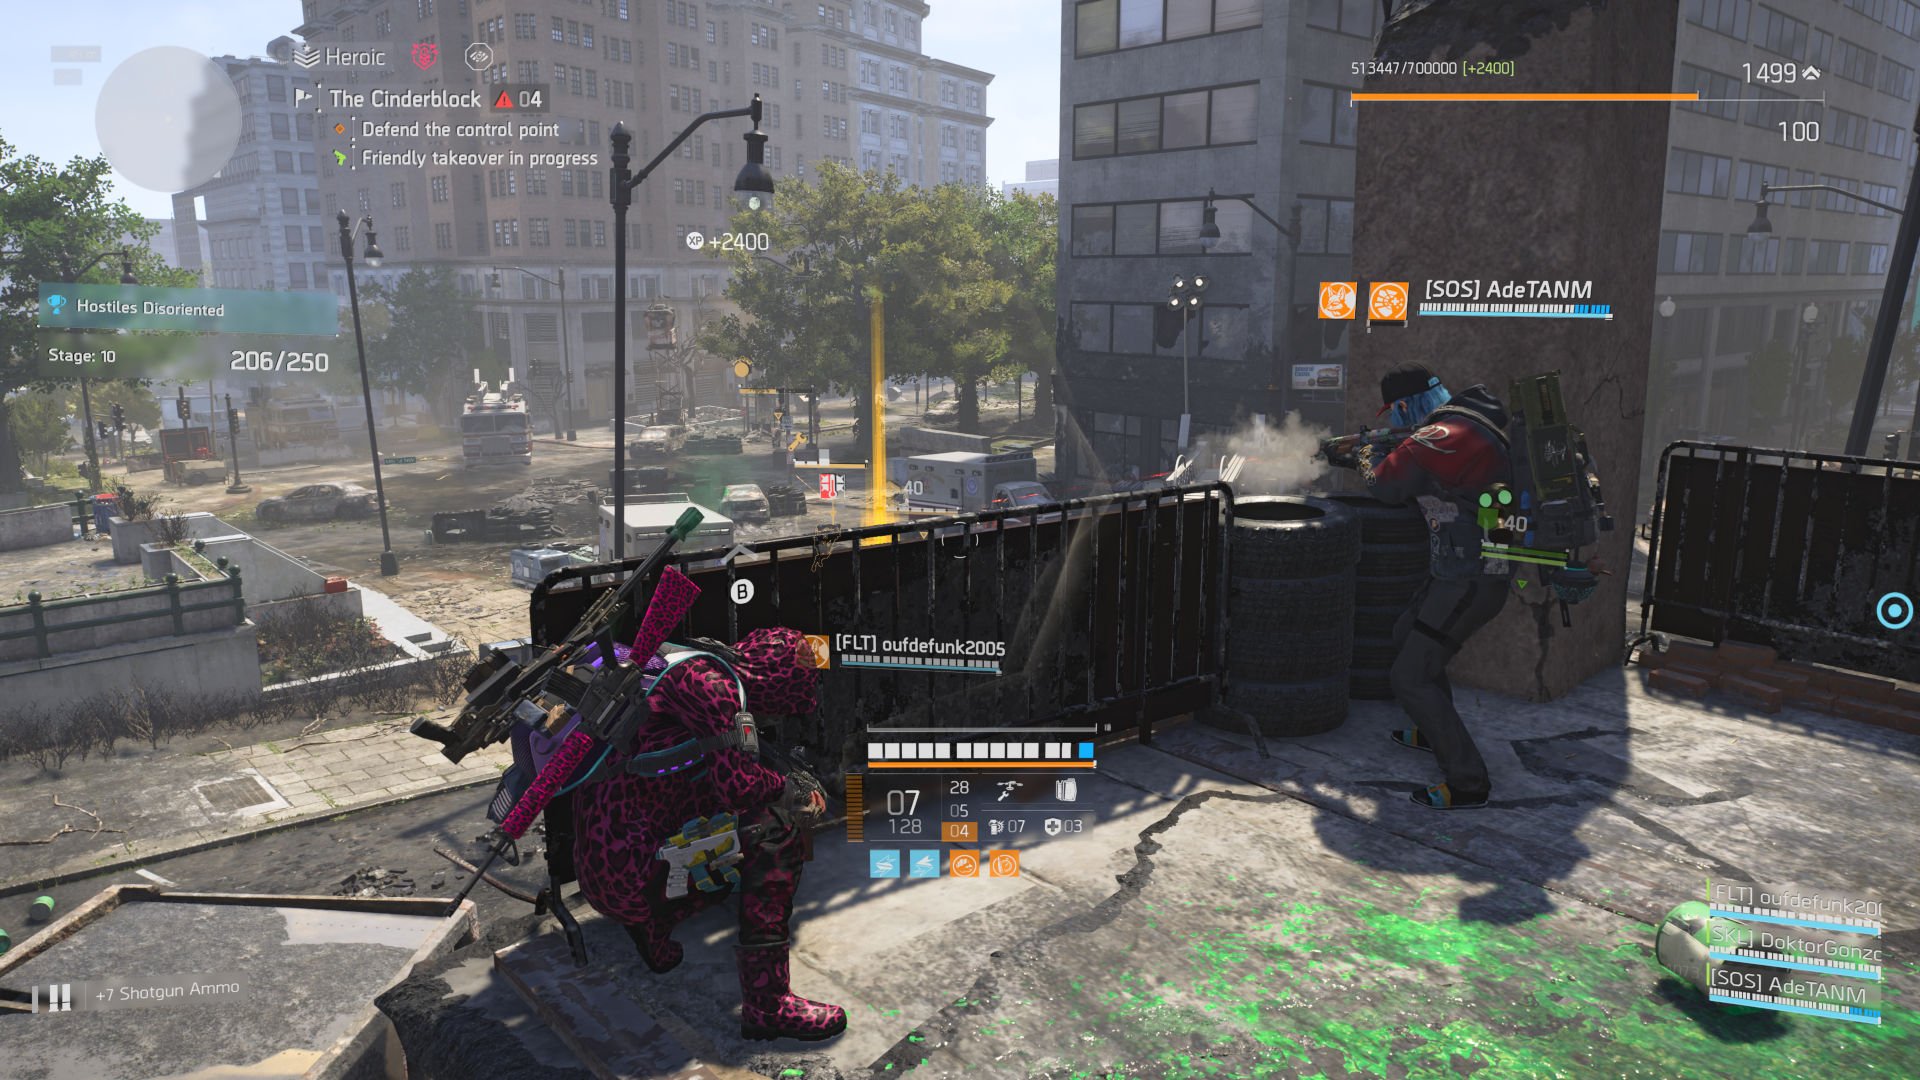 How to disorient enemies in The Division 2